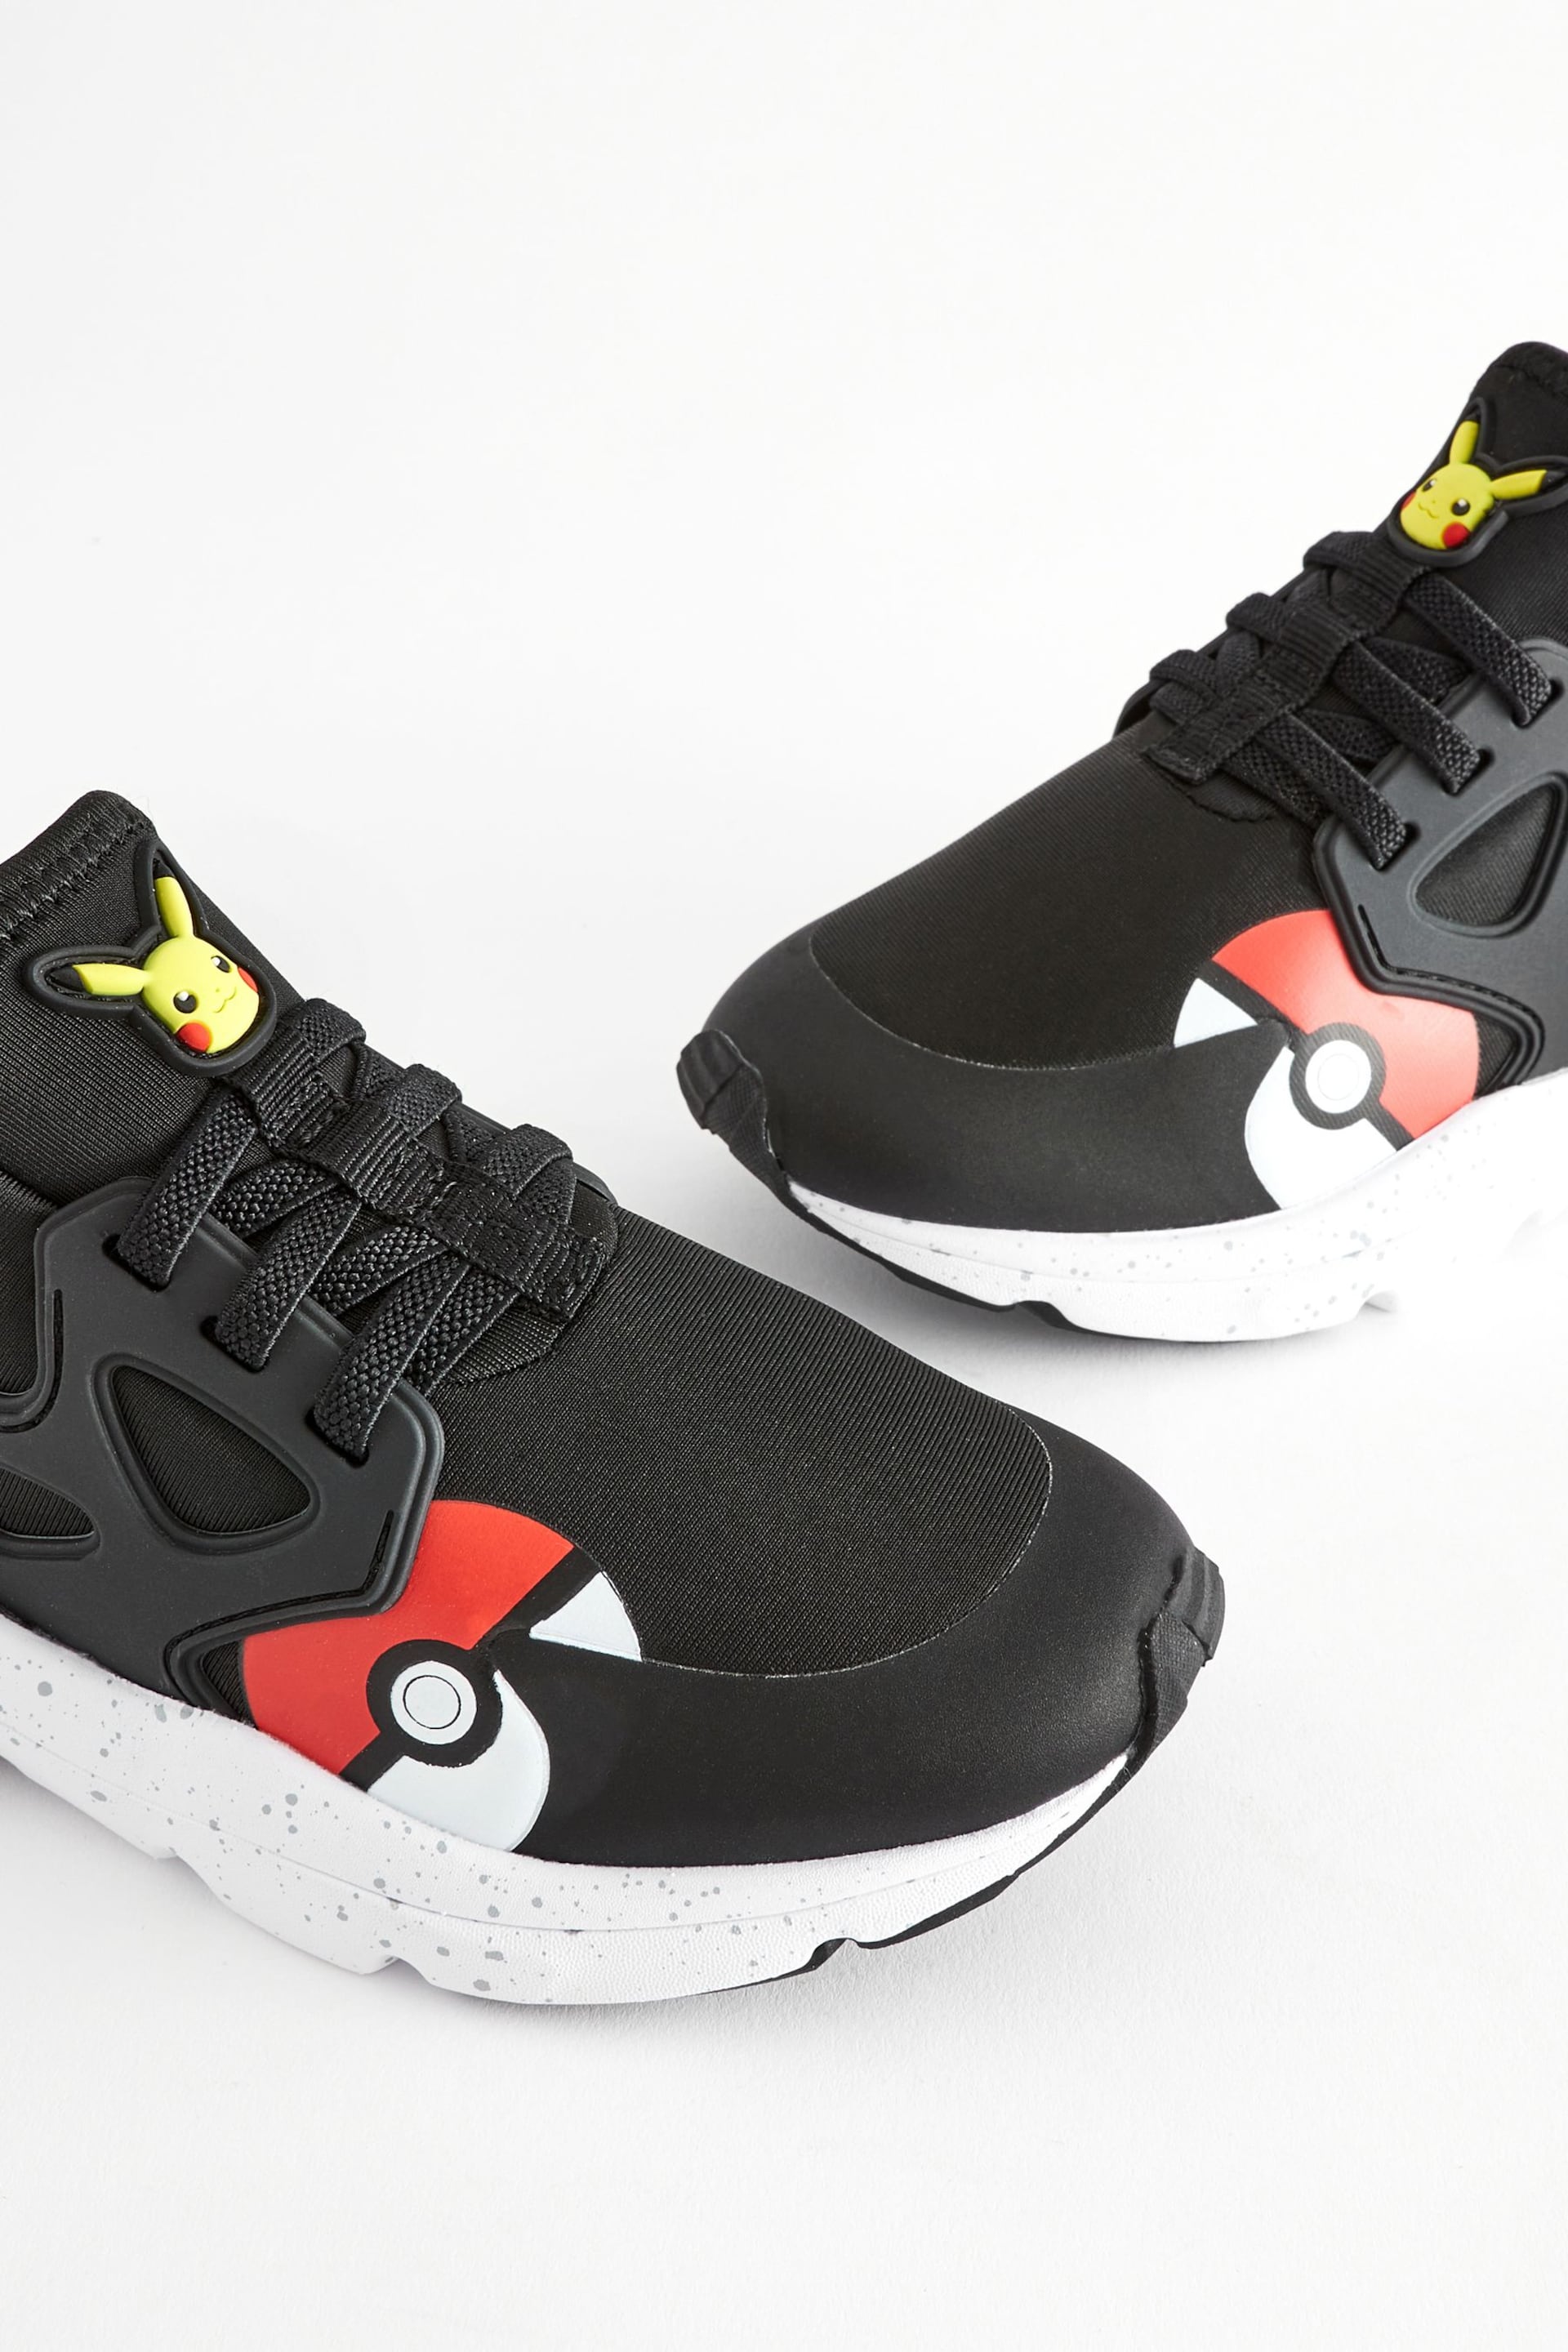 Black/Red Pokemon Elastic Lace Trainers - Image 5 of 6